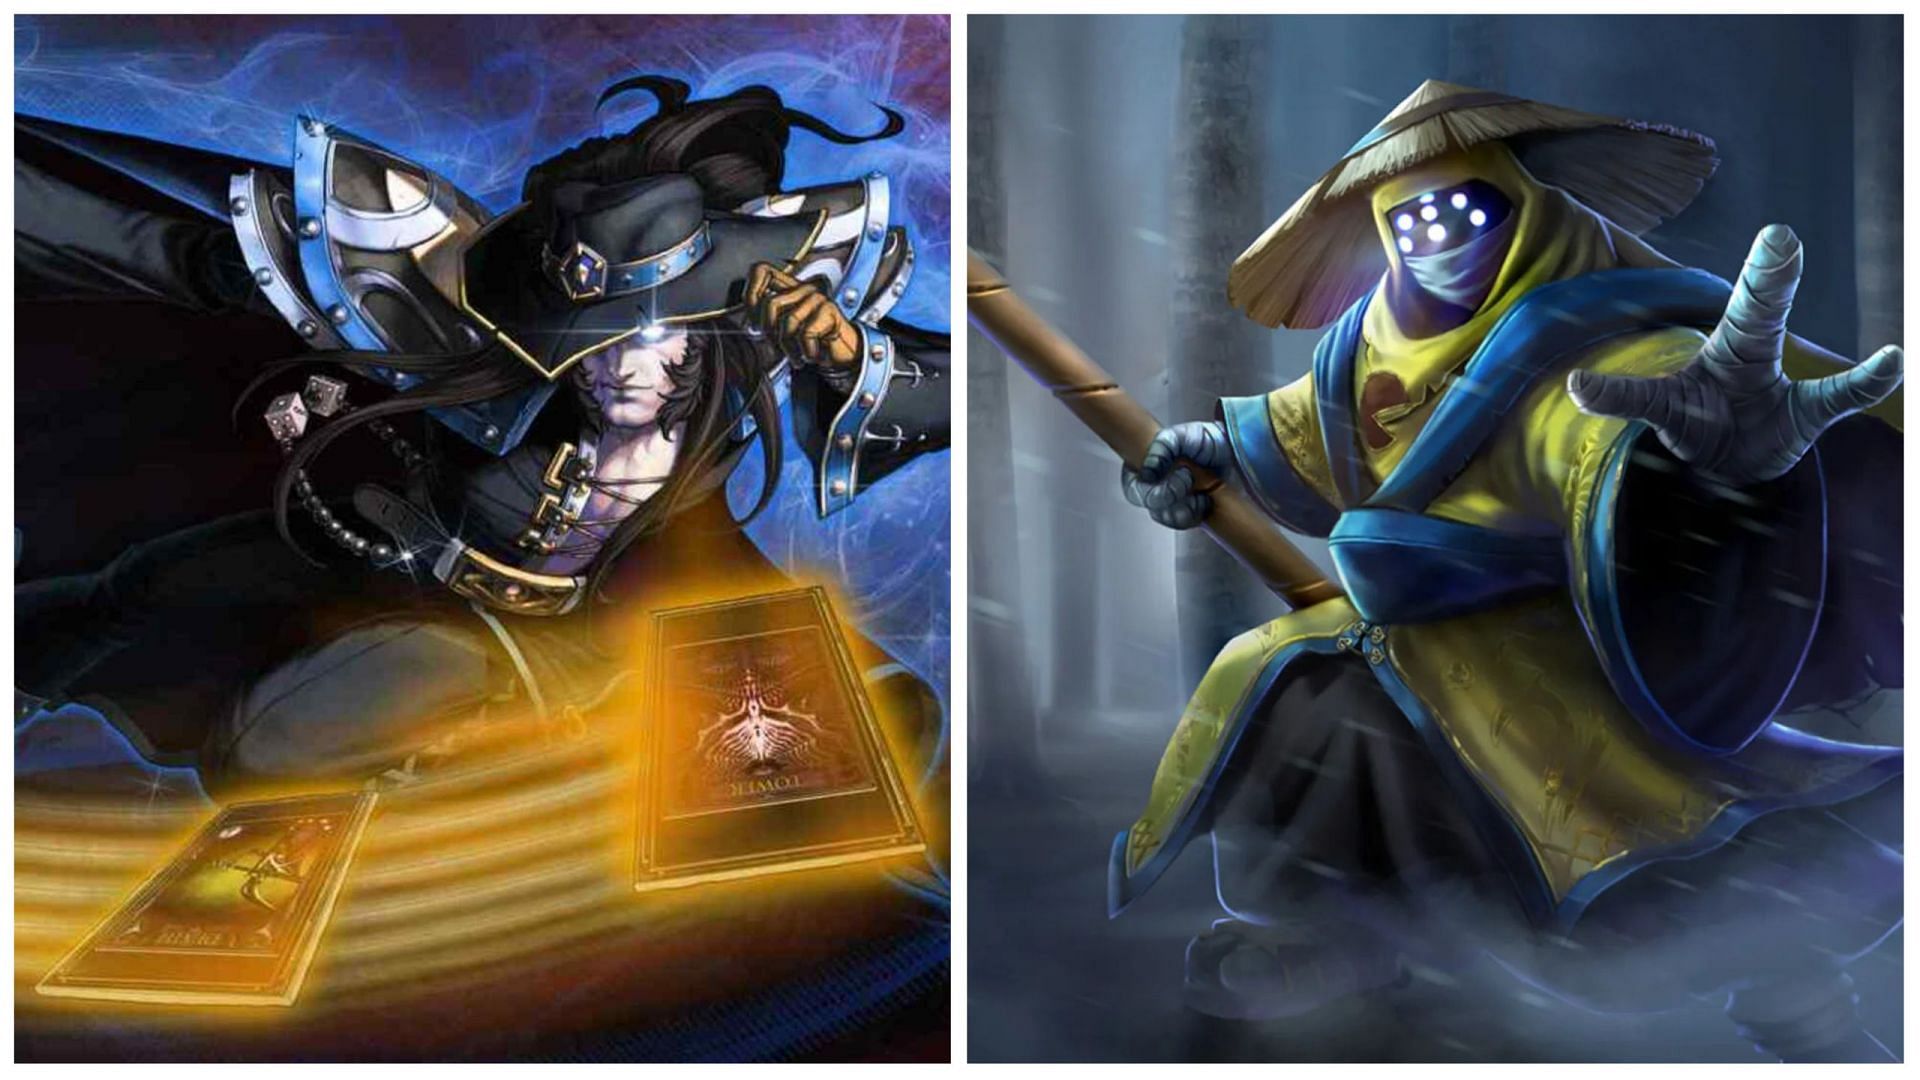 PAX Twisted Fate and Jax Skins (Images via Riot Games)